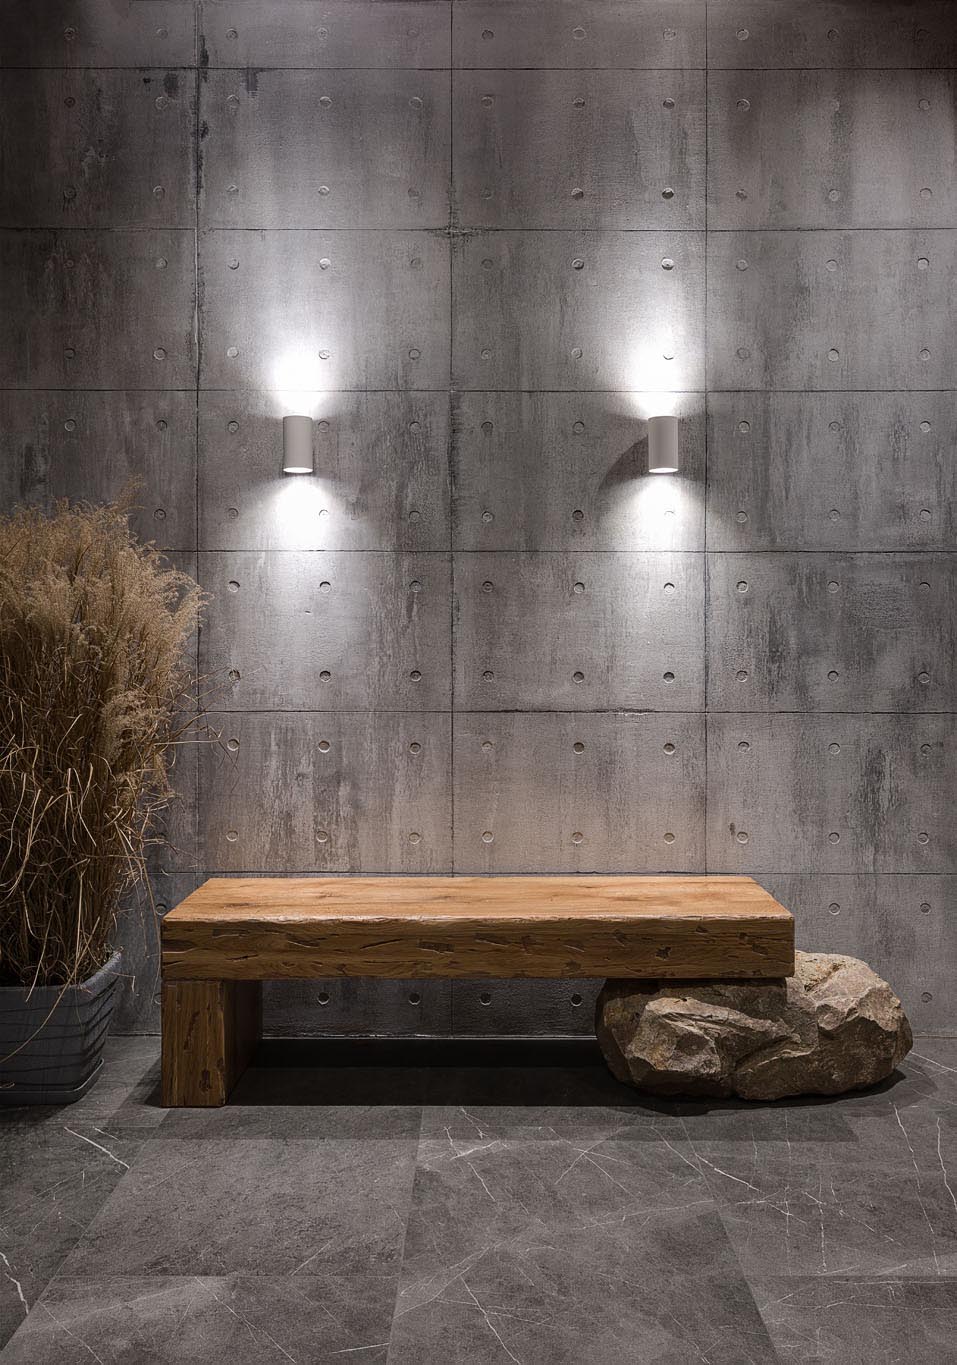 This modern entryway has an exposed concrete wall highlighted by two wall scones, and features a wood bench that rests on a boulder.